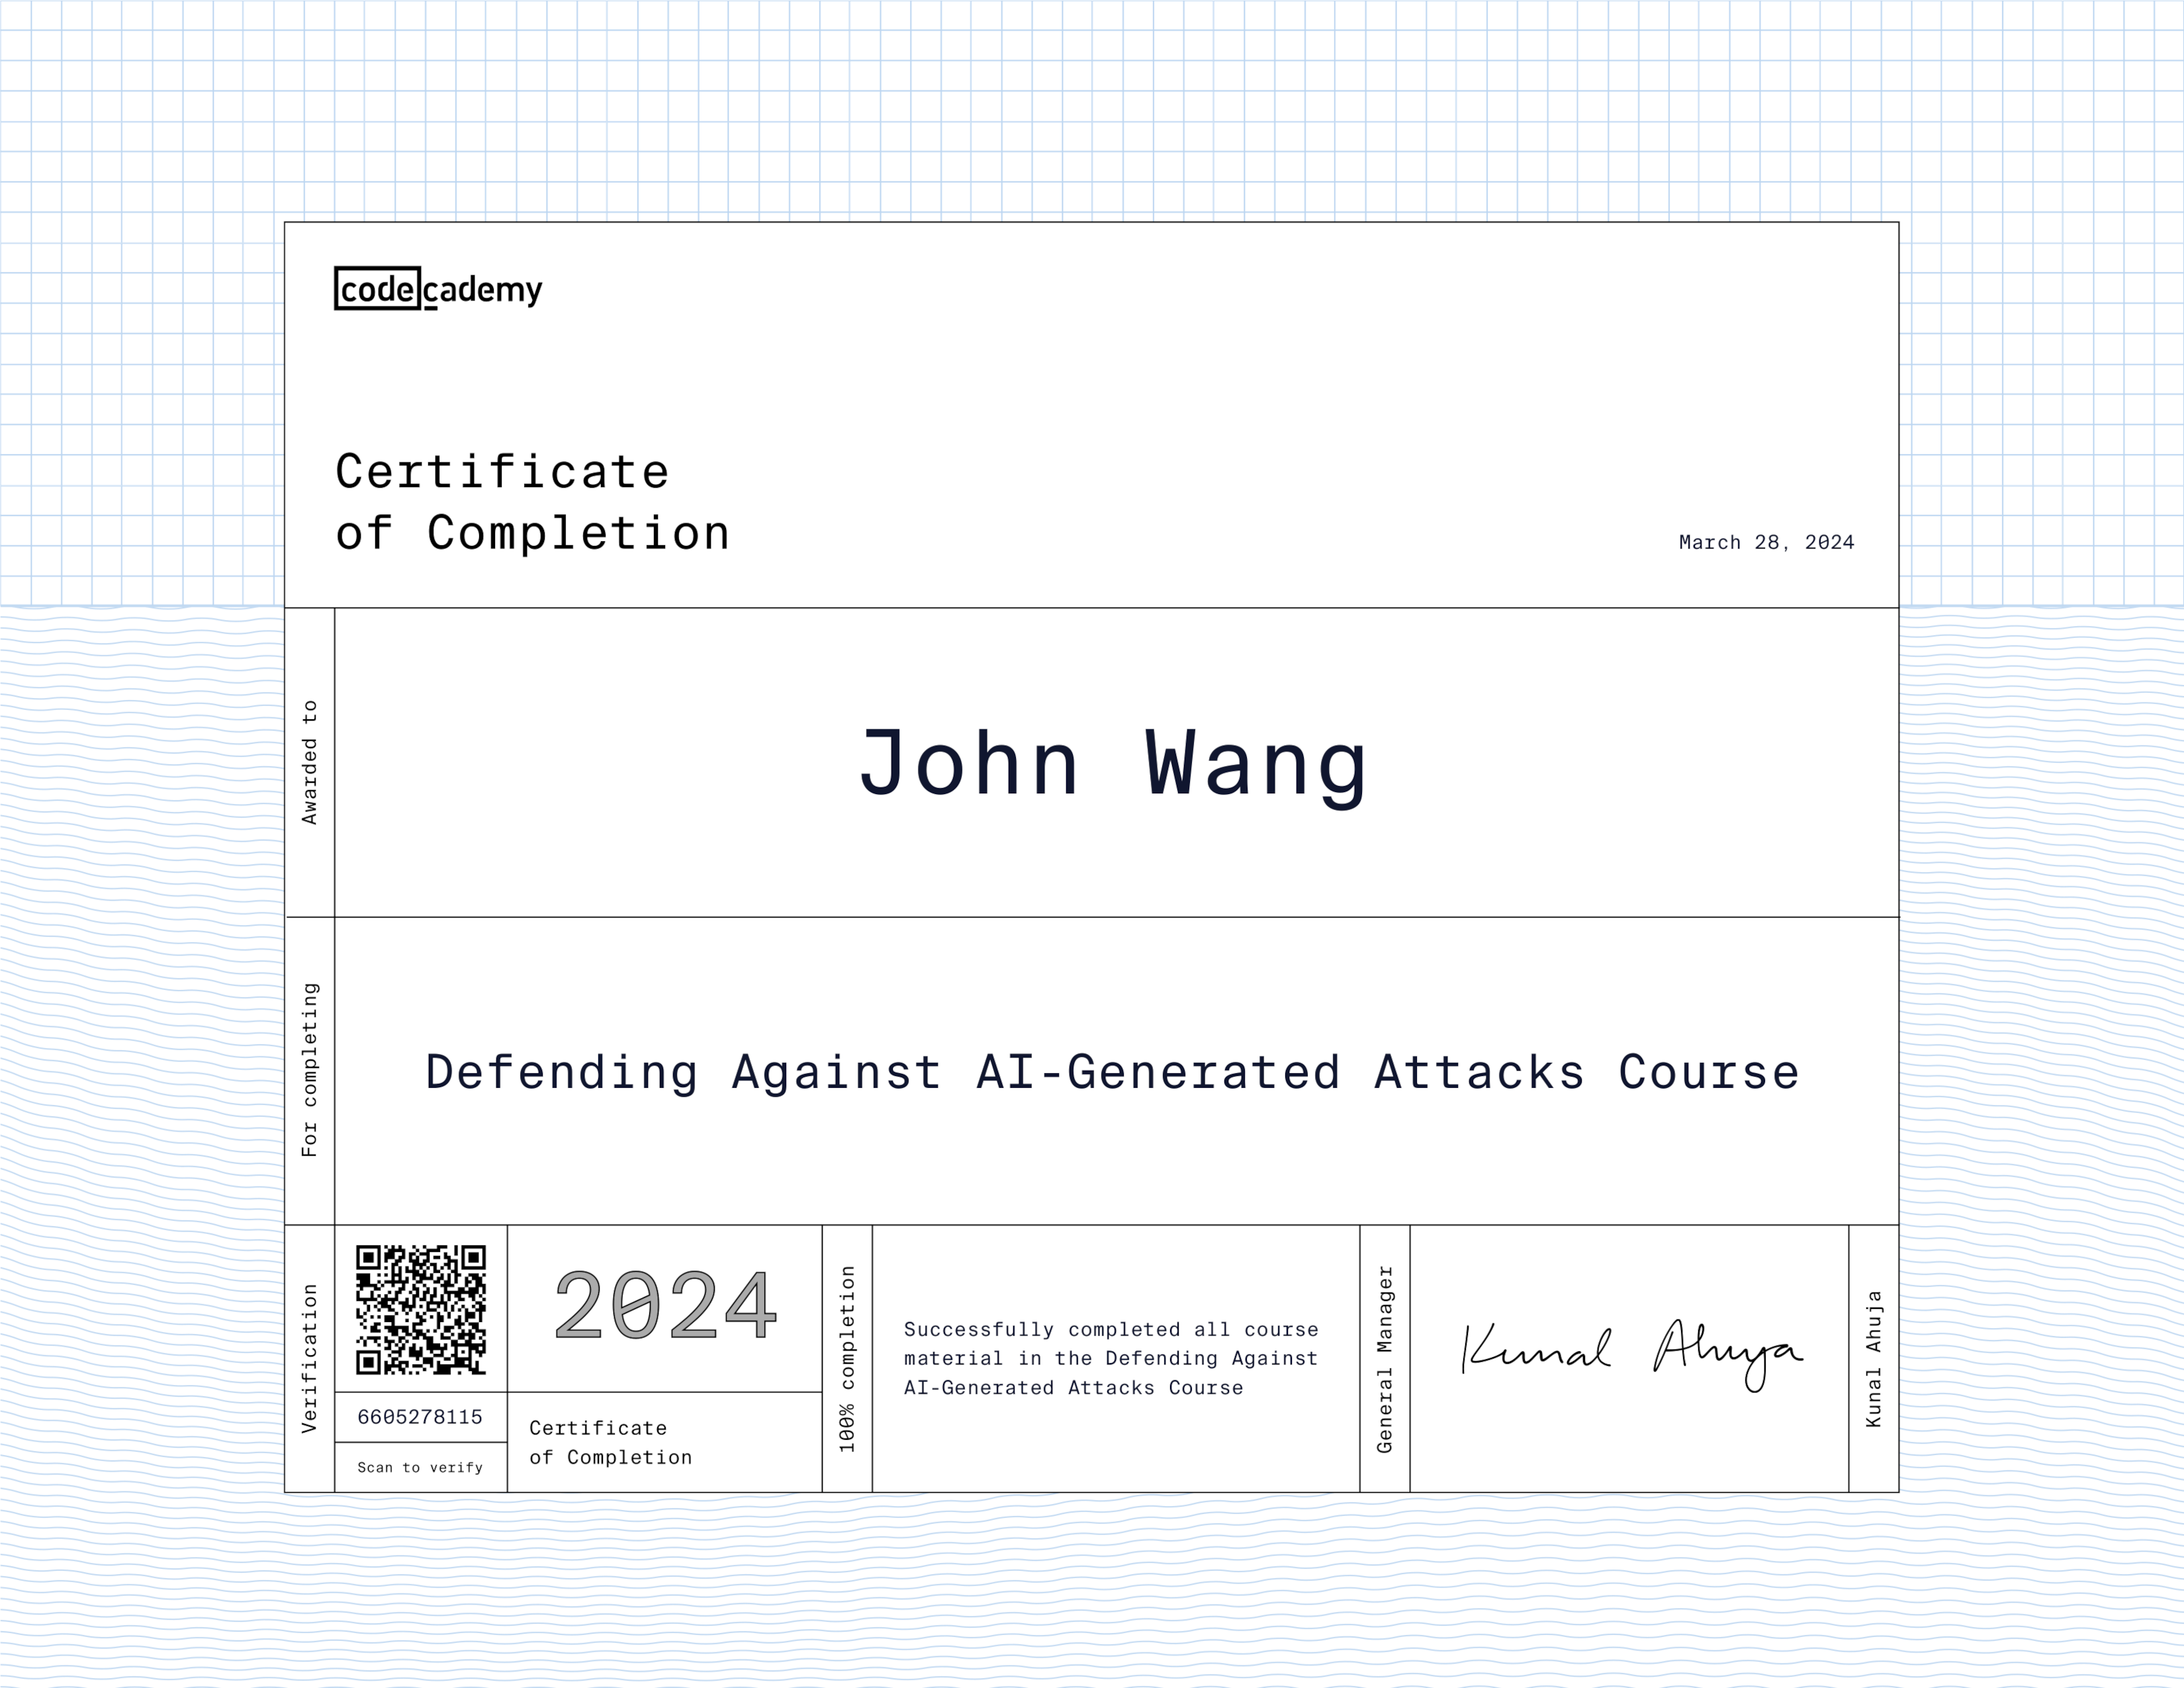 John's Defending Against AI-Generated Attacks from Codecademy